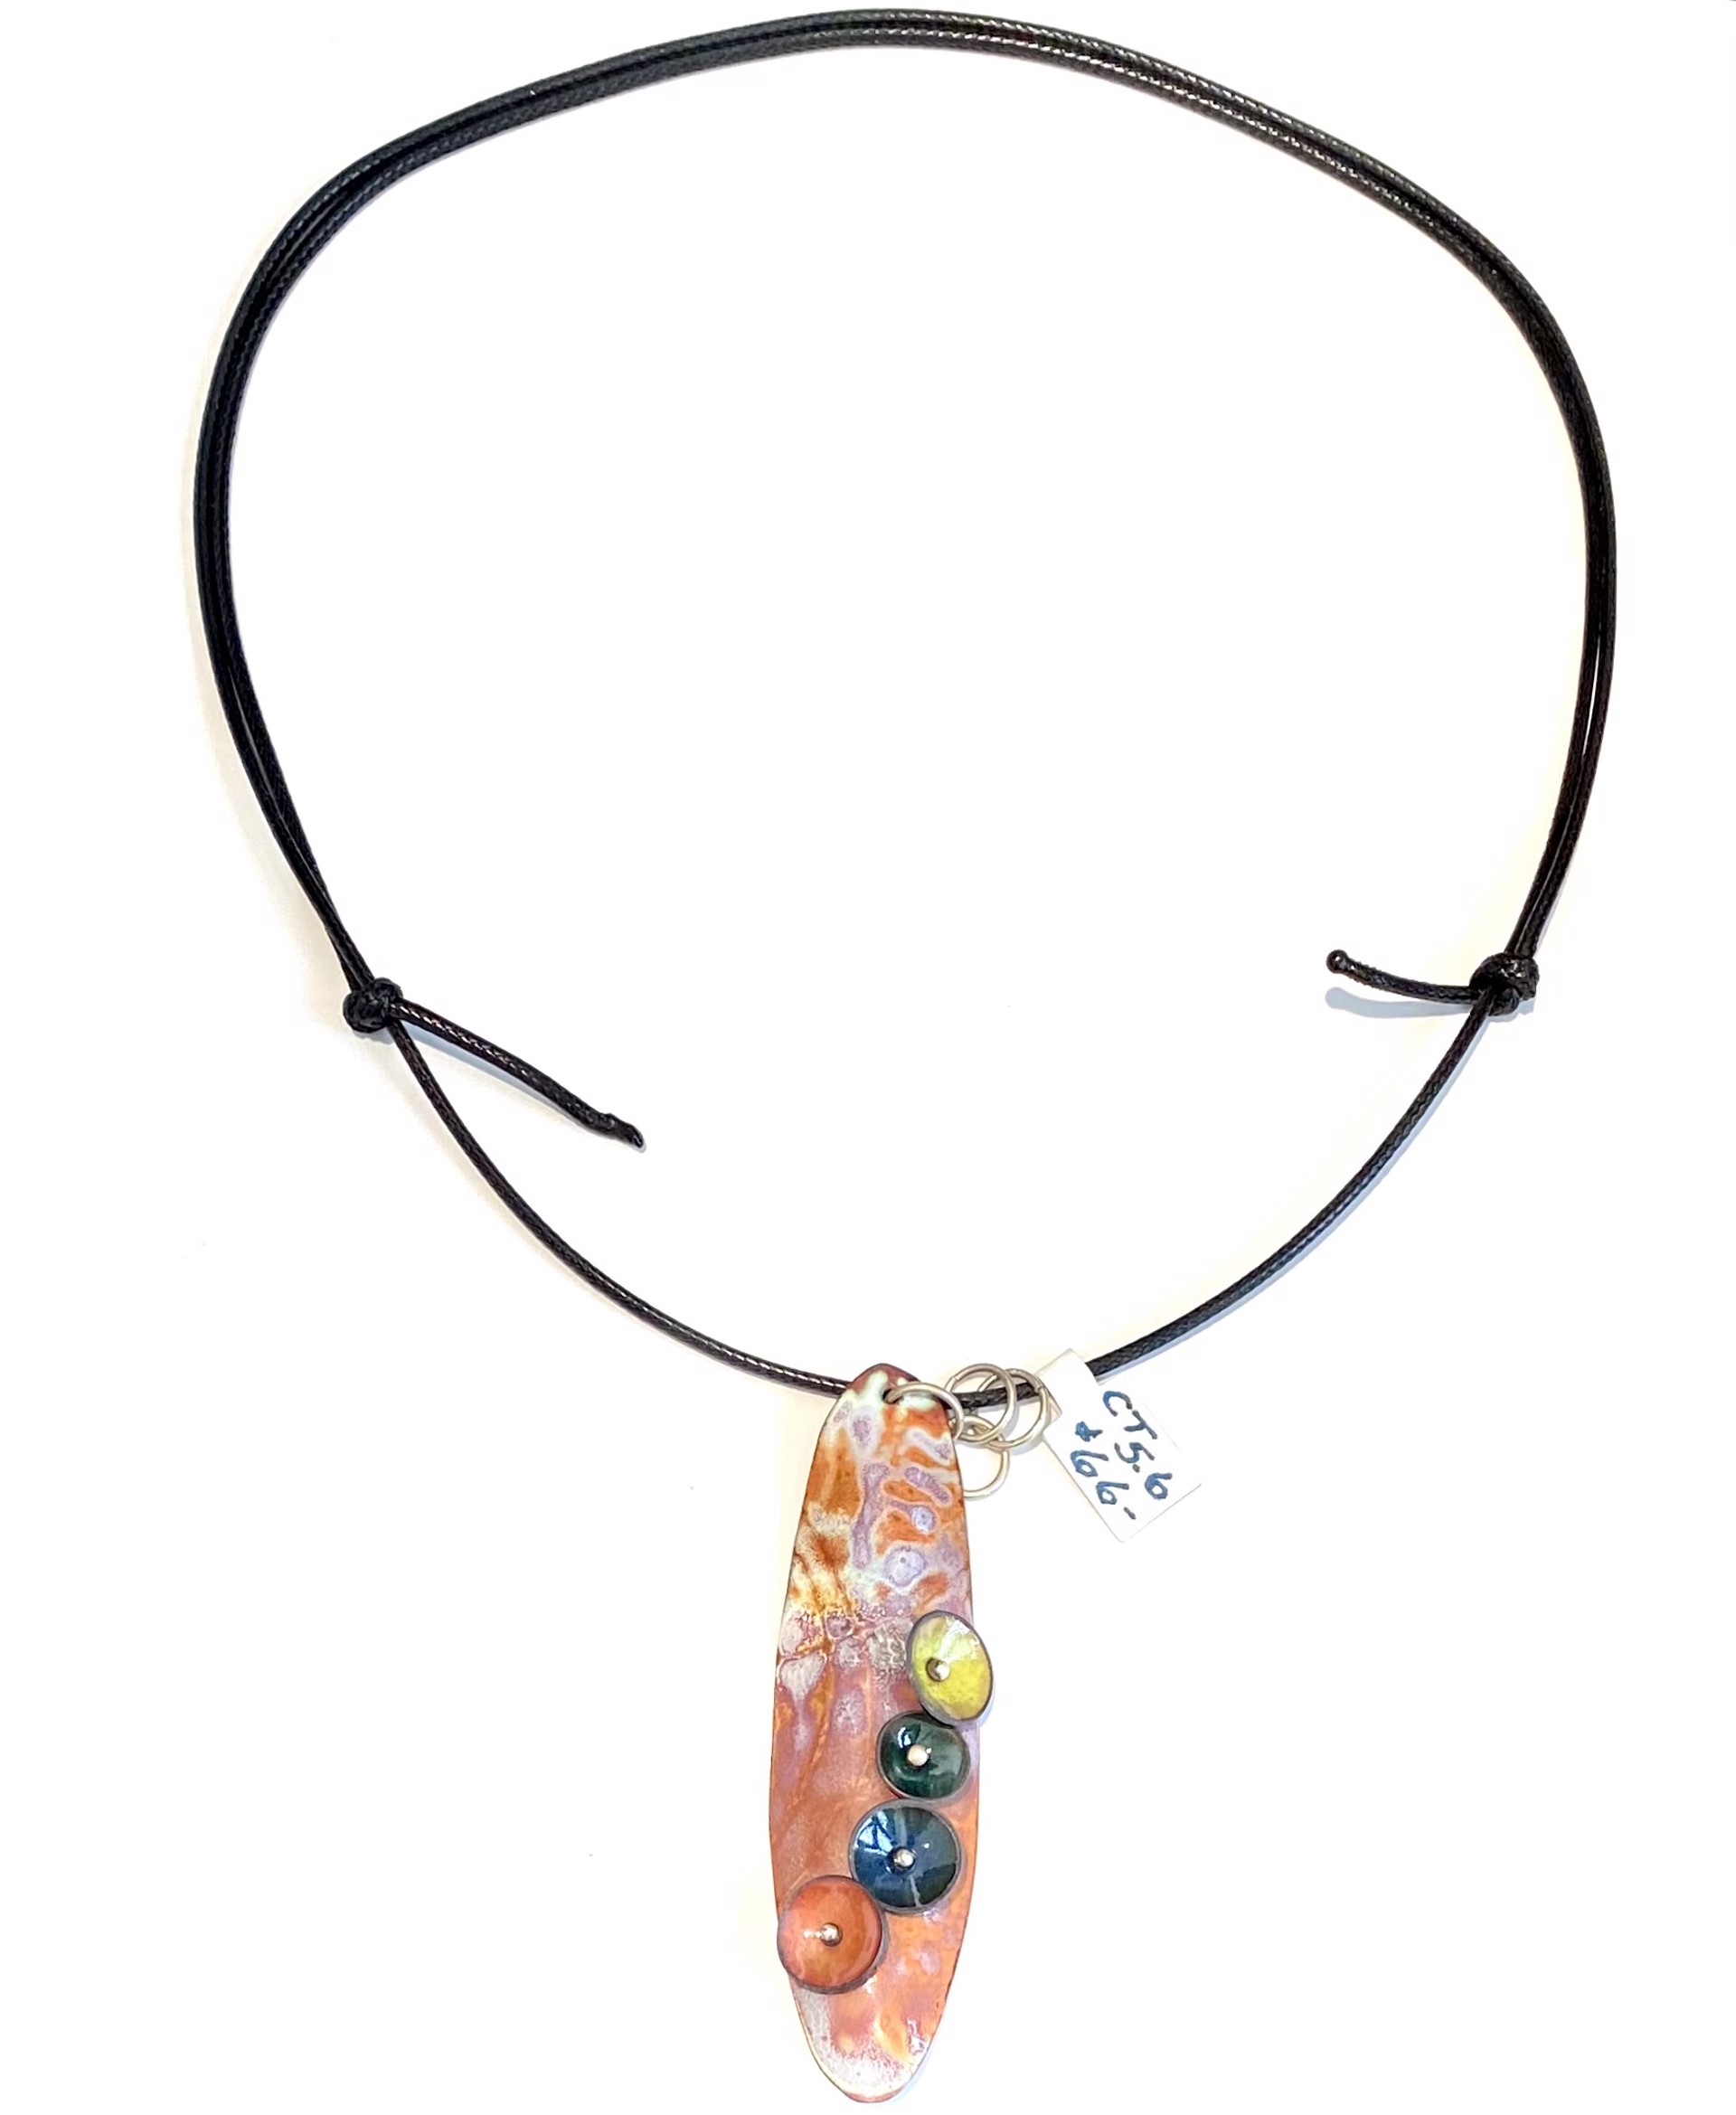 5.6 Enamel on Copper Torched Fired Leather Necklace by Cathy Talbot